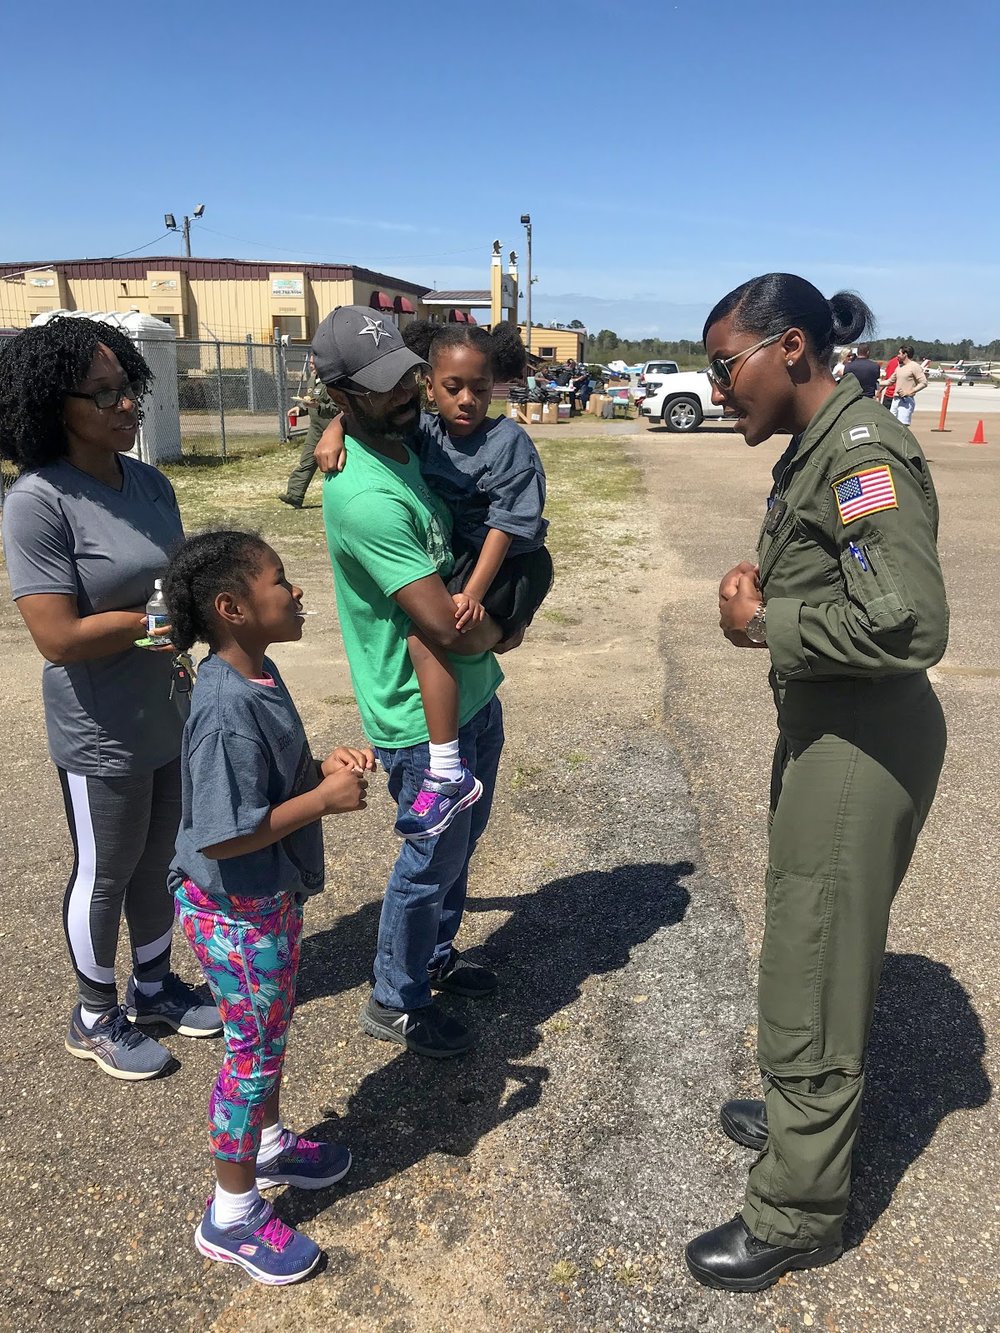  Coast Guard pilot Angel Hughes invites a participant to visit her airplane during a youth flight camp in Tuskegee, AL.  Photo courtesy of Danielle Williams   